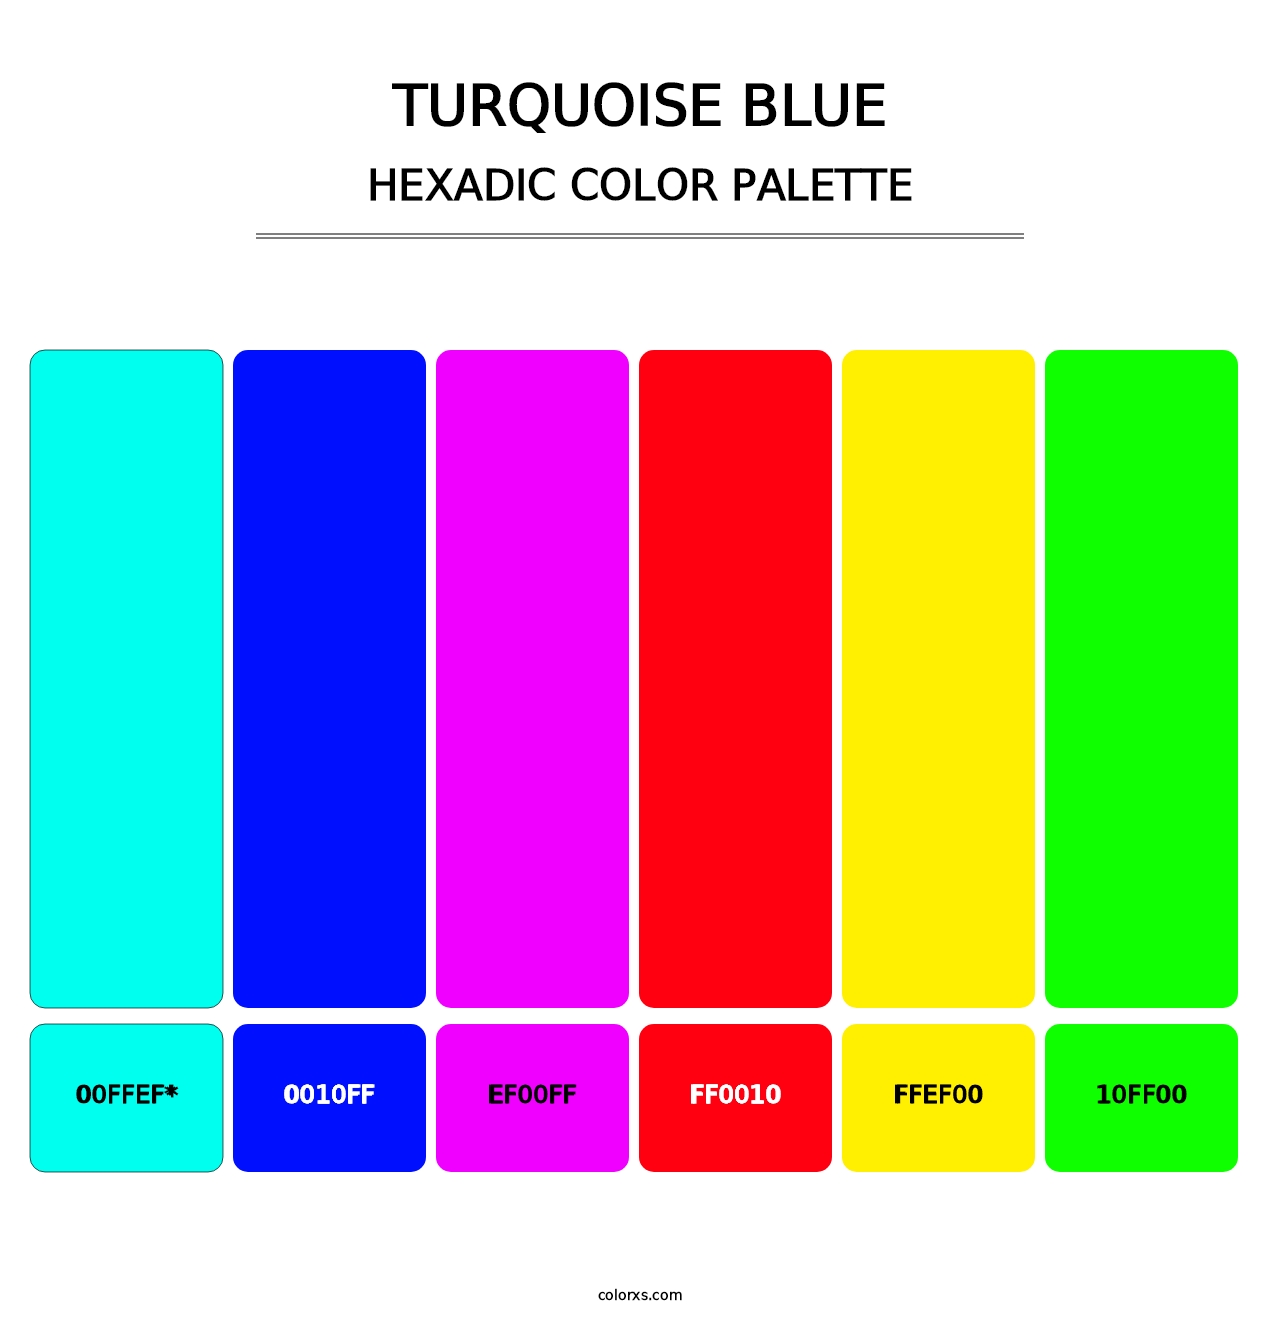 Turquoise Blue - Hexadic Color Palette